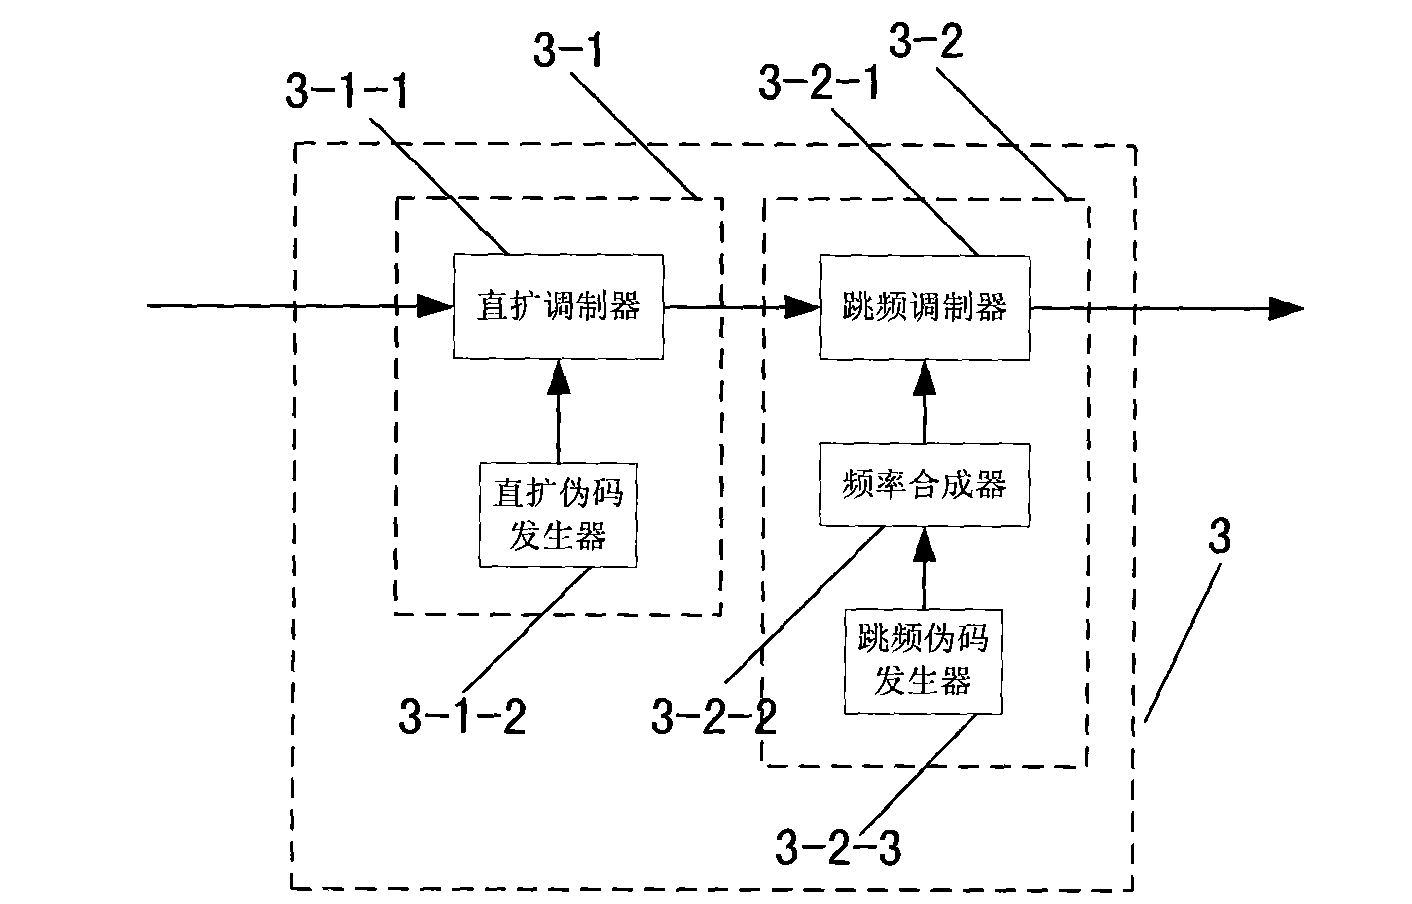 Radio navigation system with frequency spreading and hopping system